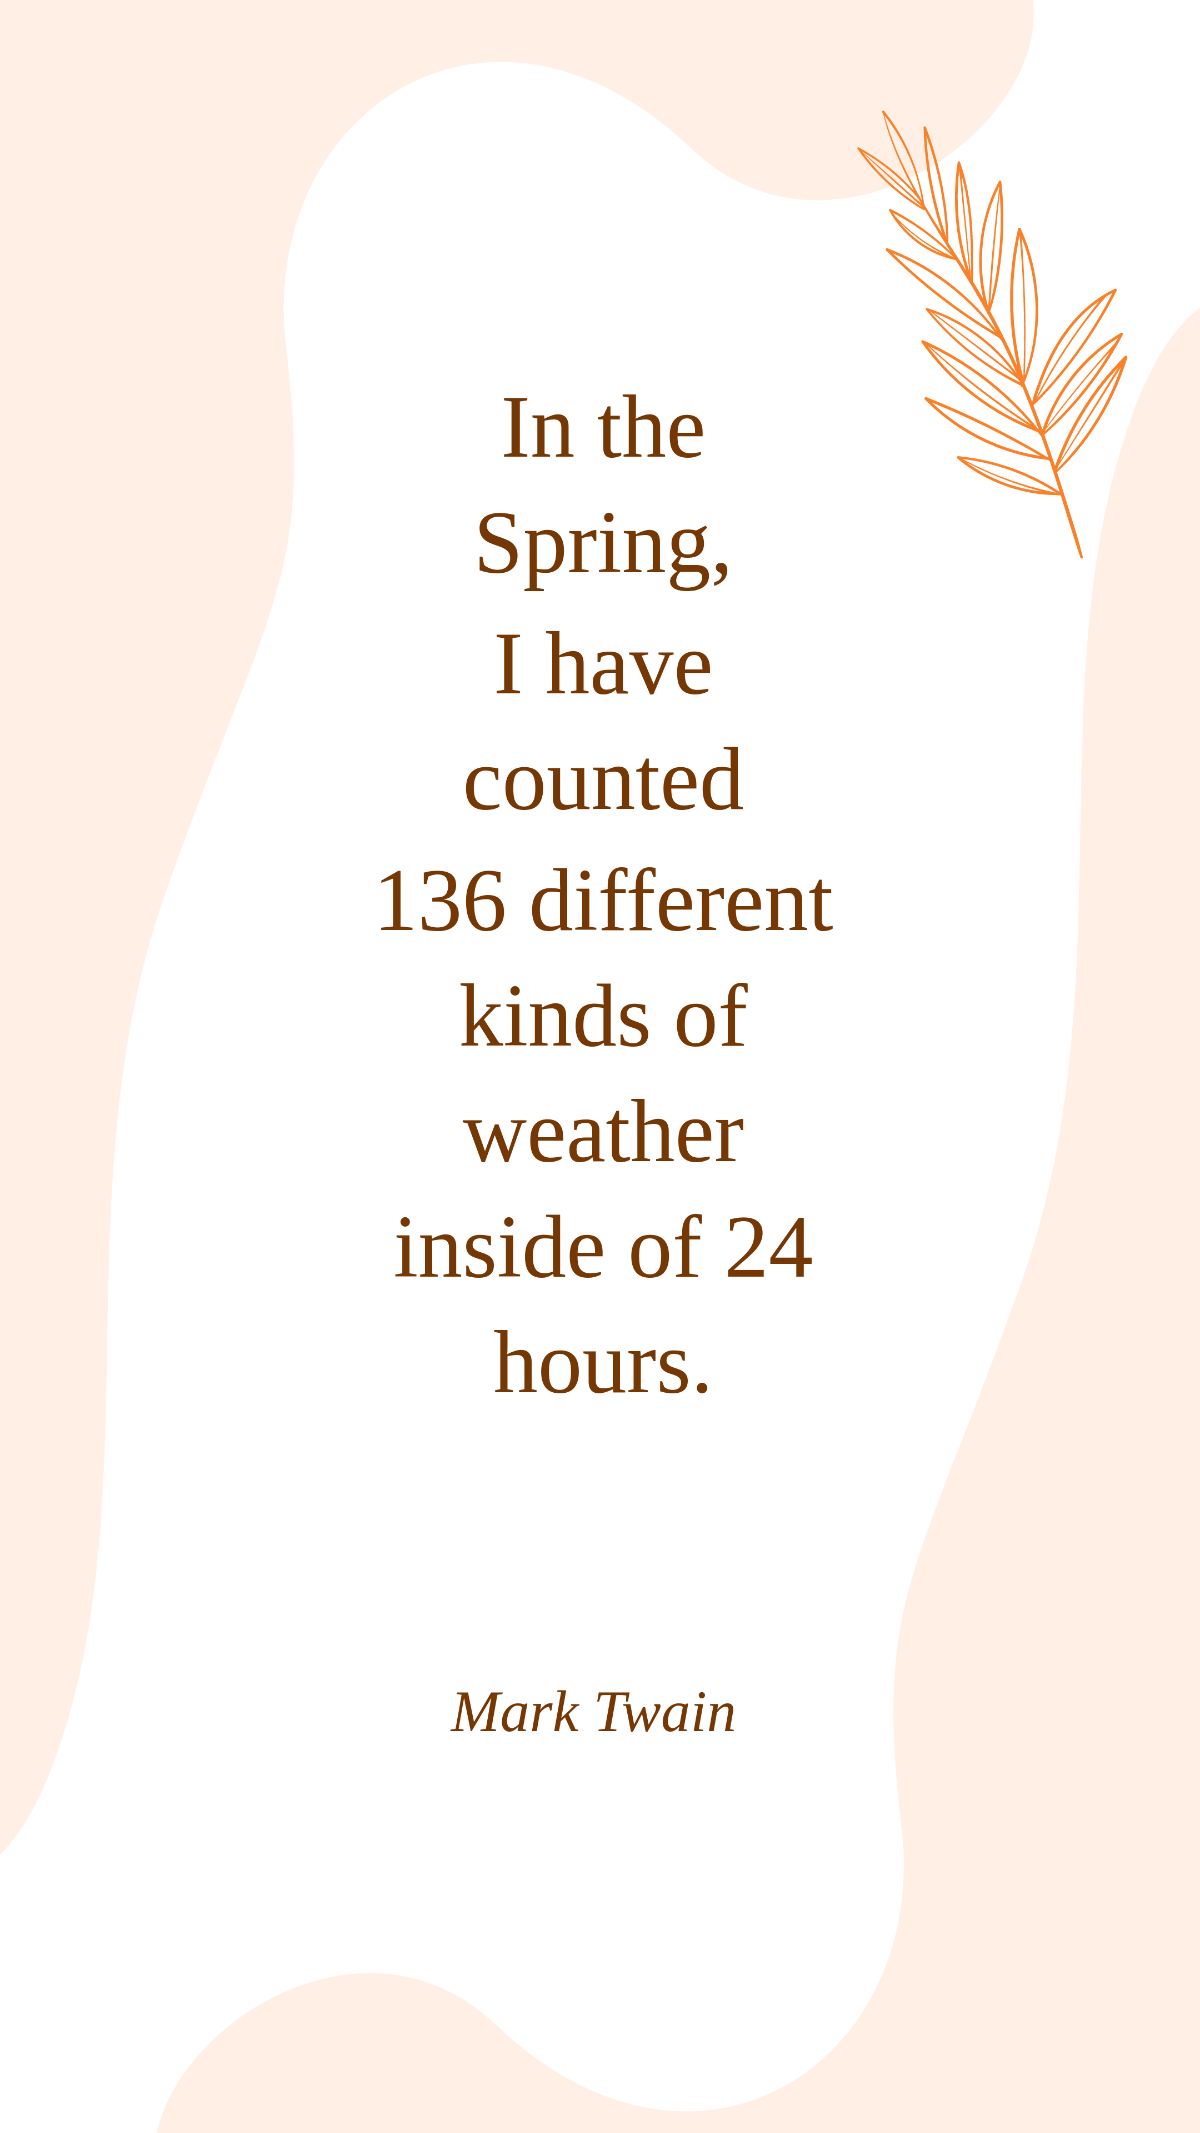 Mark Twain - In the Spring, I have counted 136 different kinds of weather inside of 24 hours. Template